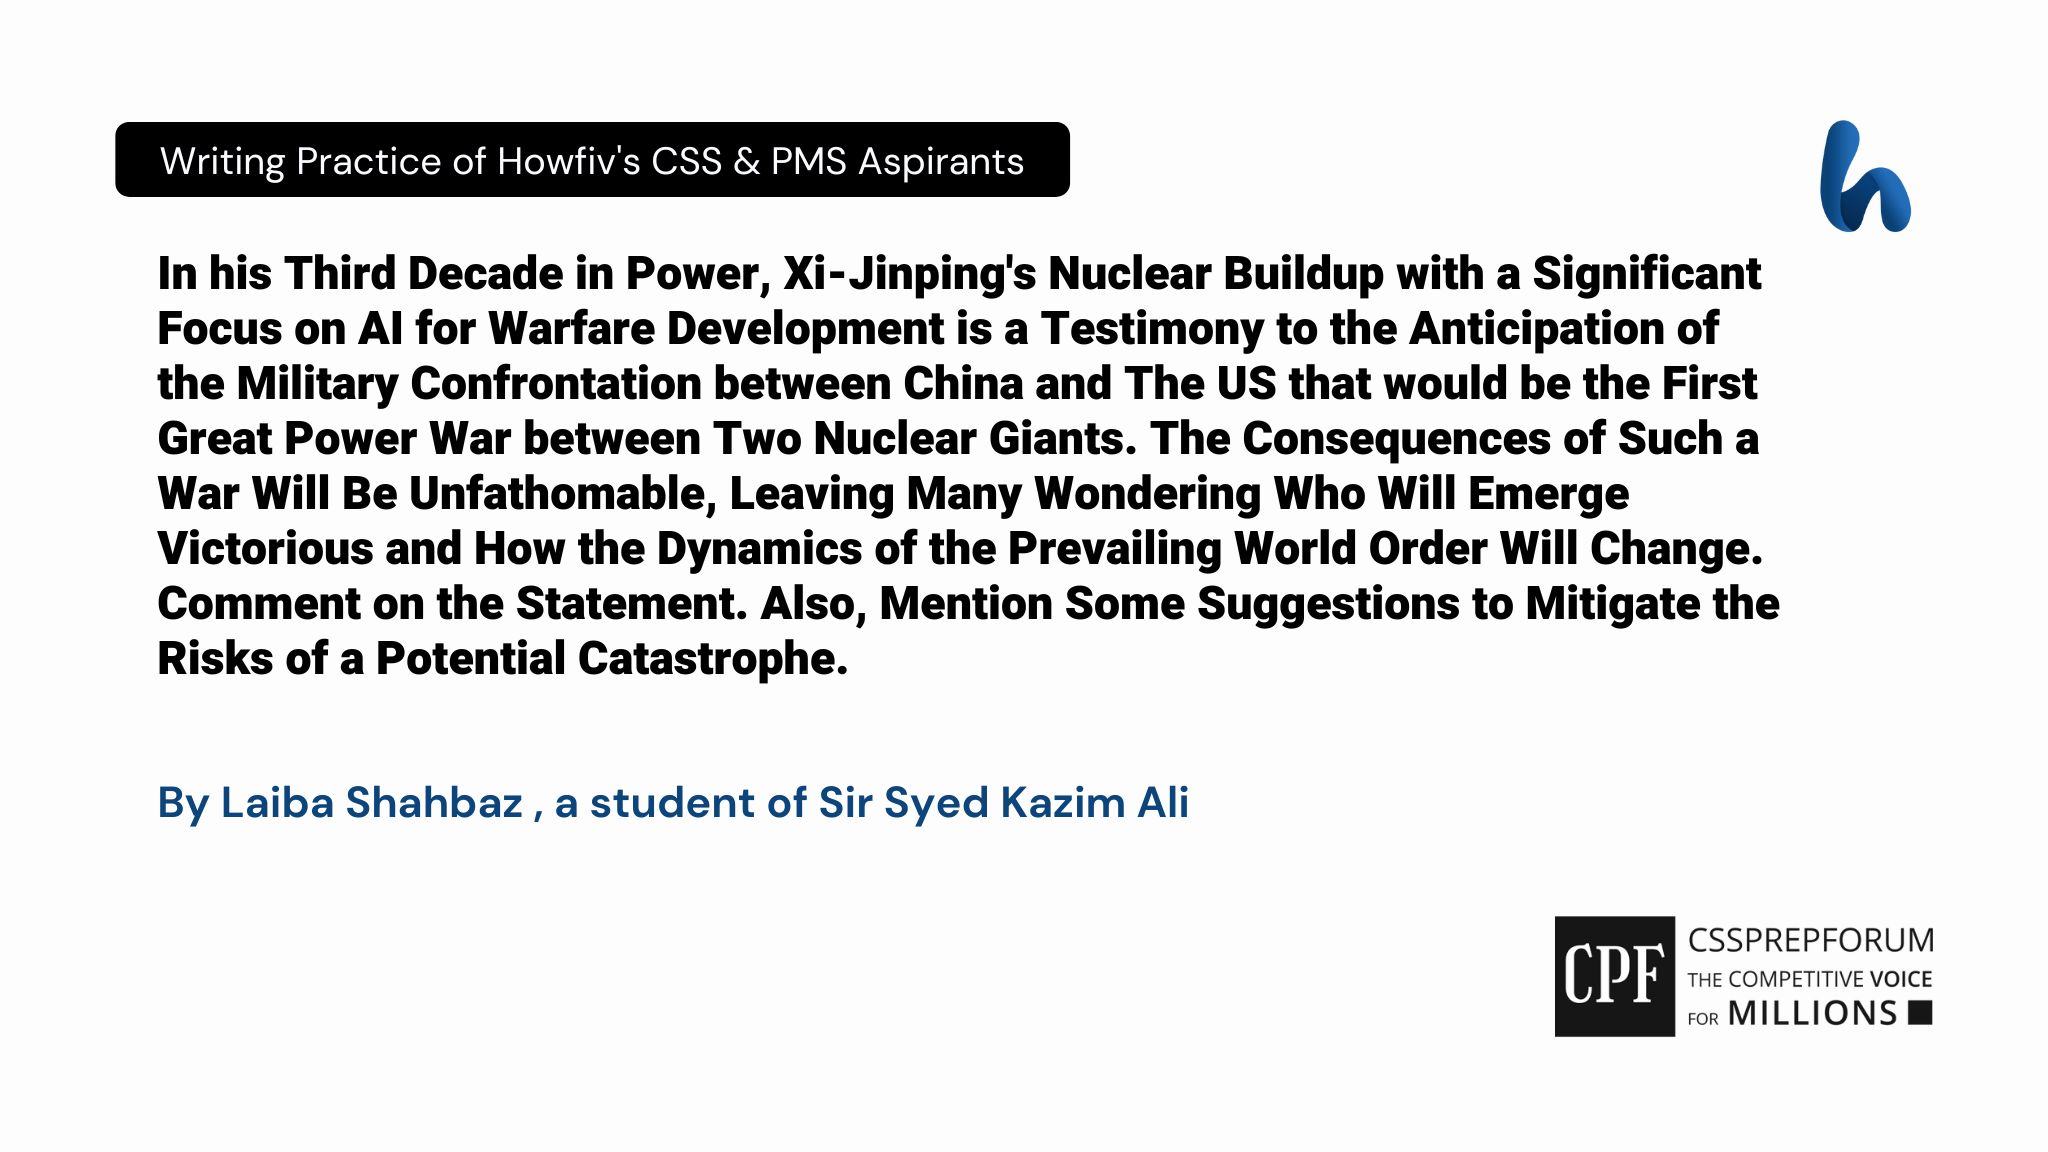 In his Third Decade in Power, Xi-Jinping's Nuclear Buildup with a Significant Focus on AI for Warfare Development is a Testimony to the Anticipation of the Military Confrontation between China and The US that would be the First Great Power War between Two Nuclear Giants. The Consequences of Such a War Will Be Unfathomable, Leaving Many Wondering Who Will Emerge Victorious and How the Dynamics of the Prevailing World Order Will Change. Comment on the Statement. Also, Mention Some Suggestions to Mitigate the Risks of a Potential Catastrophe. By Laiba Shahbaz